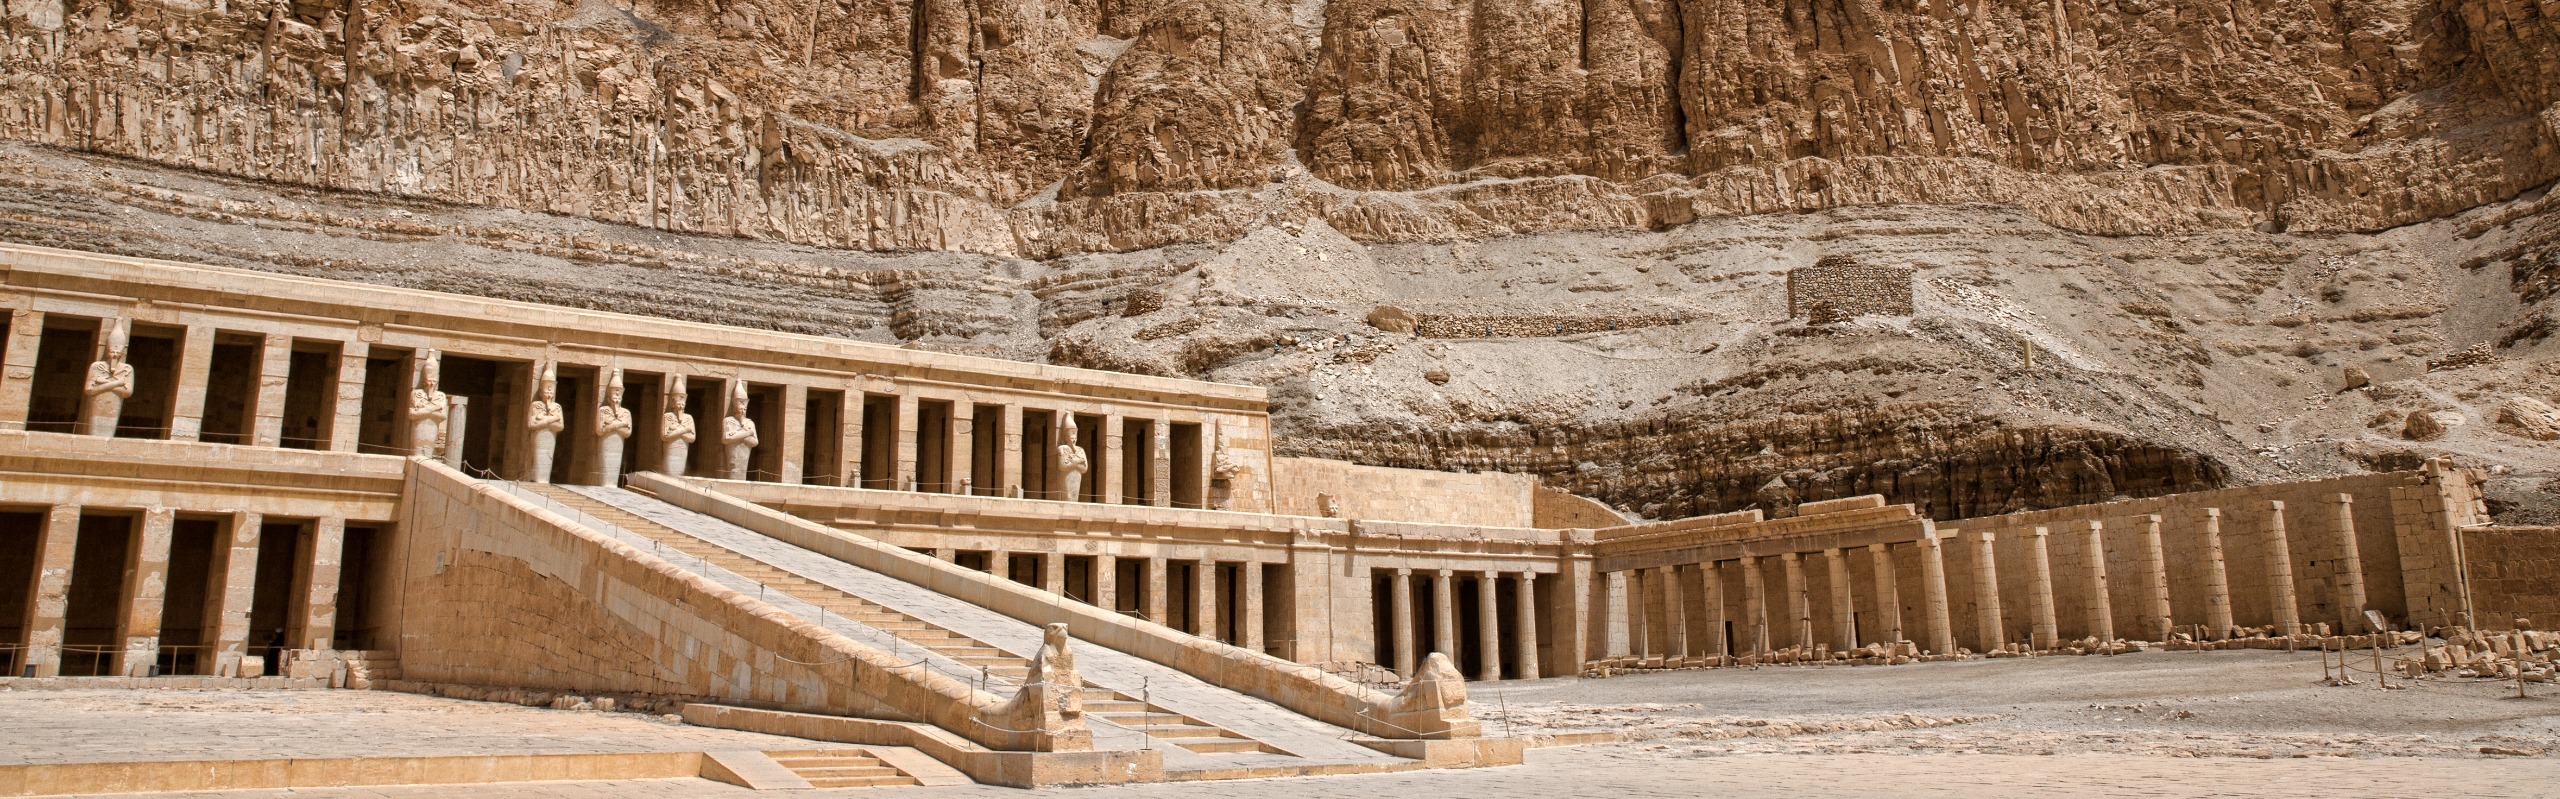 Top 10 Tourist Attractions in Egypt (Can't-Miss for First-Timers)